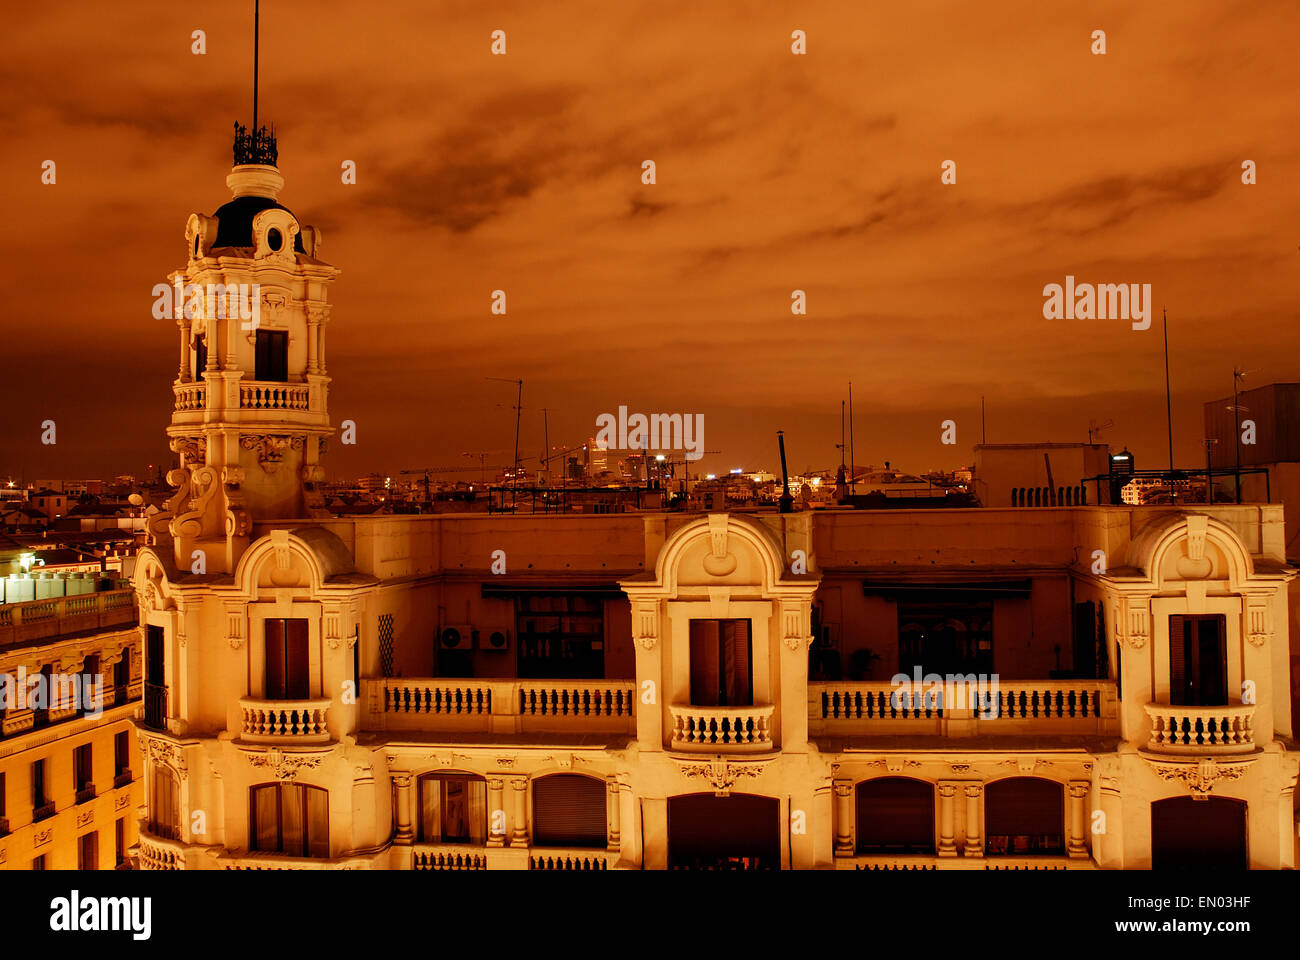 View from the Hotel de las Letras, Madrid, Spain Stock Photo